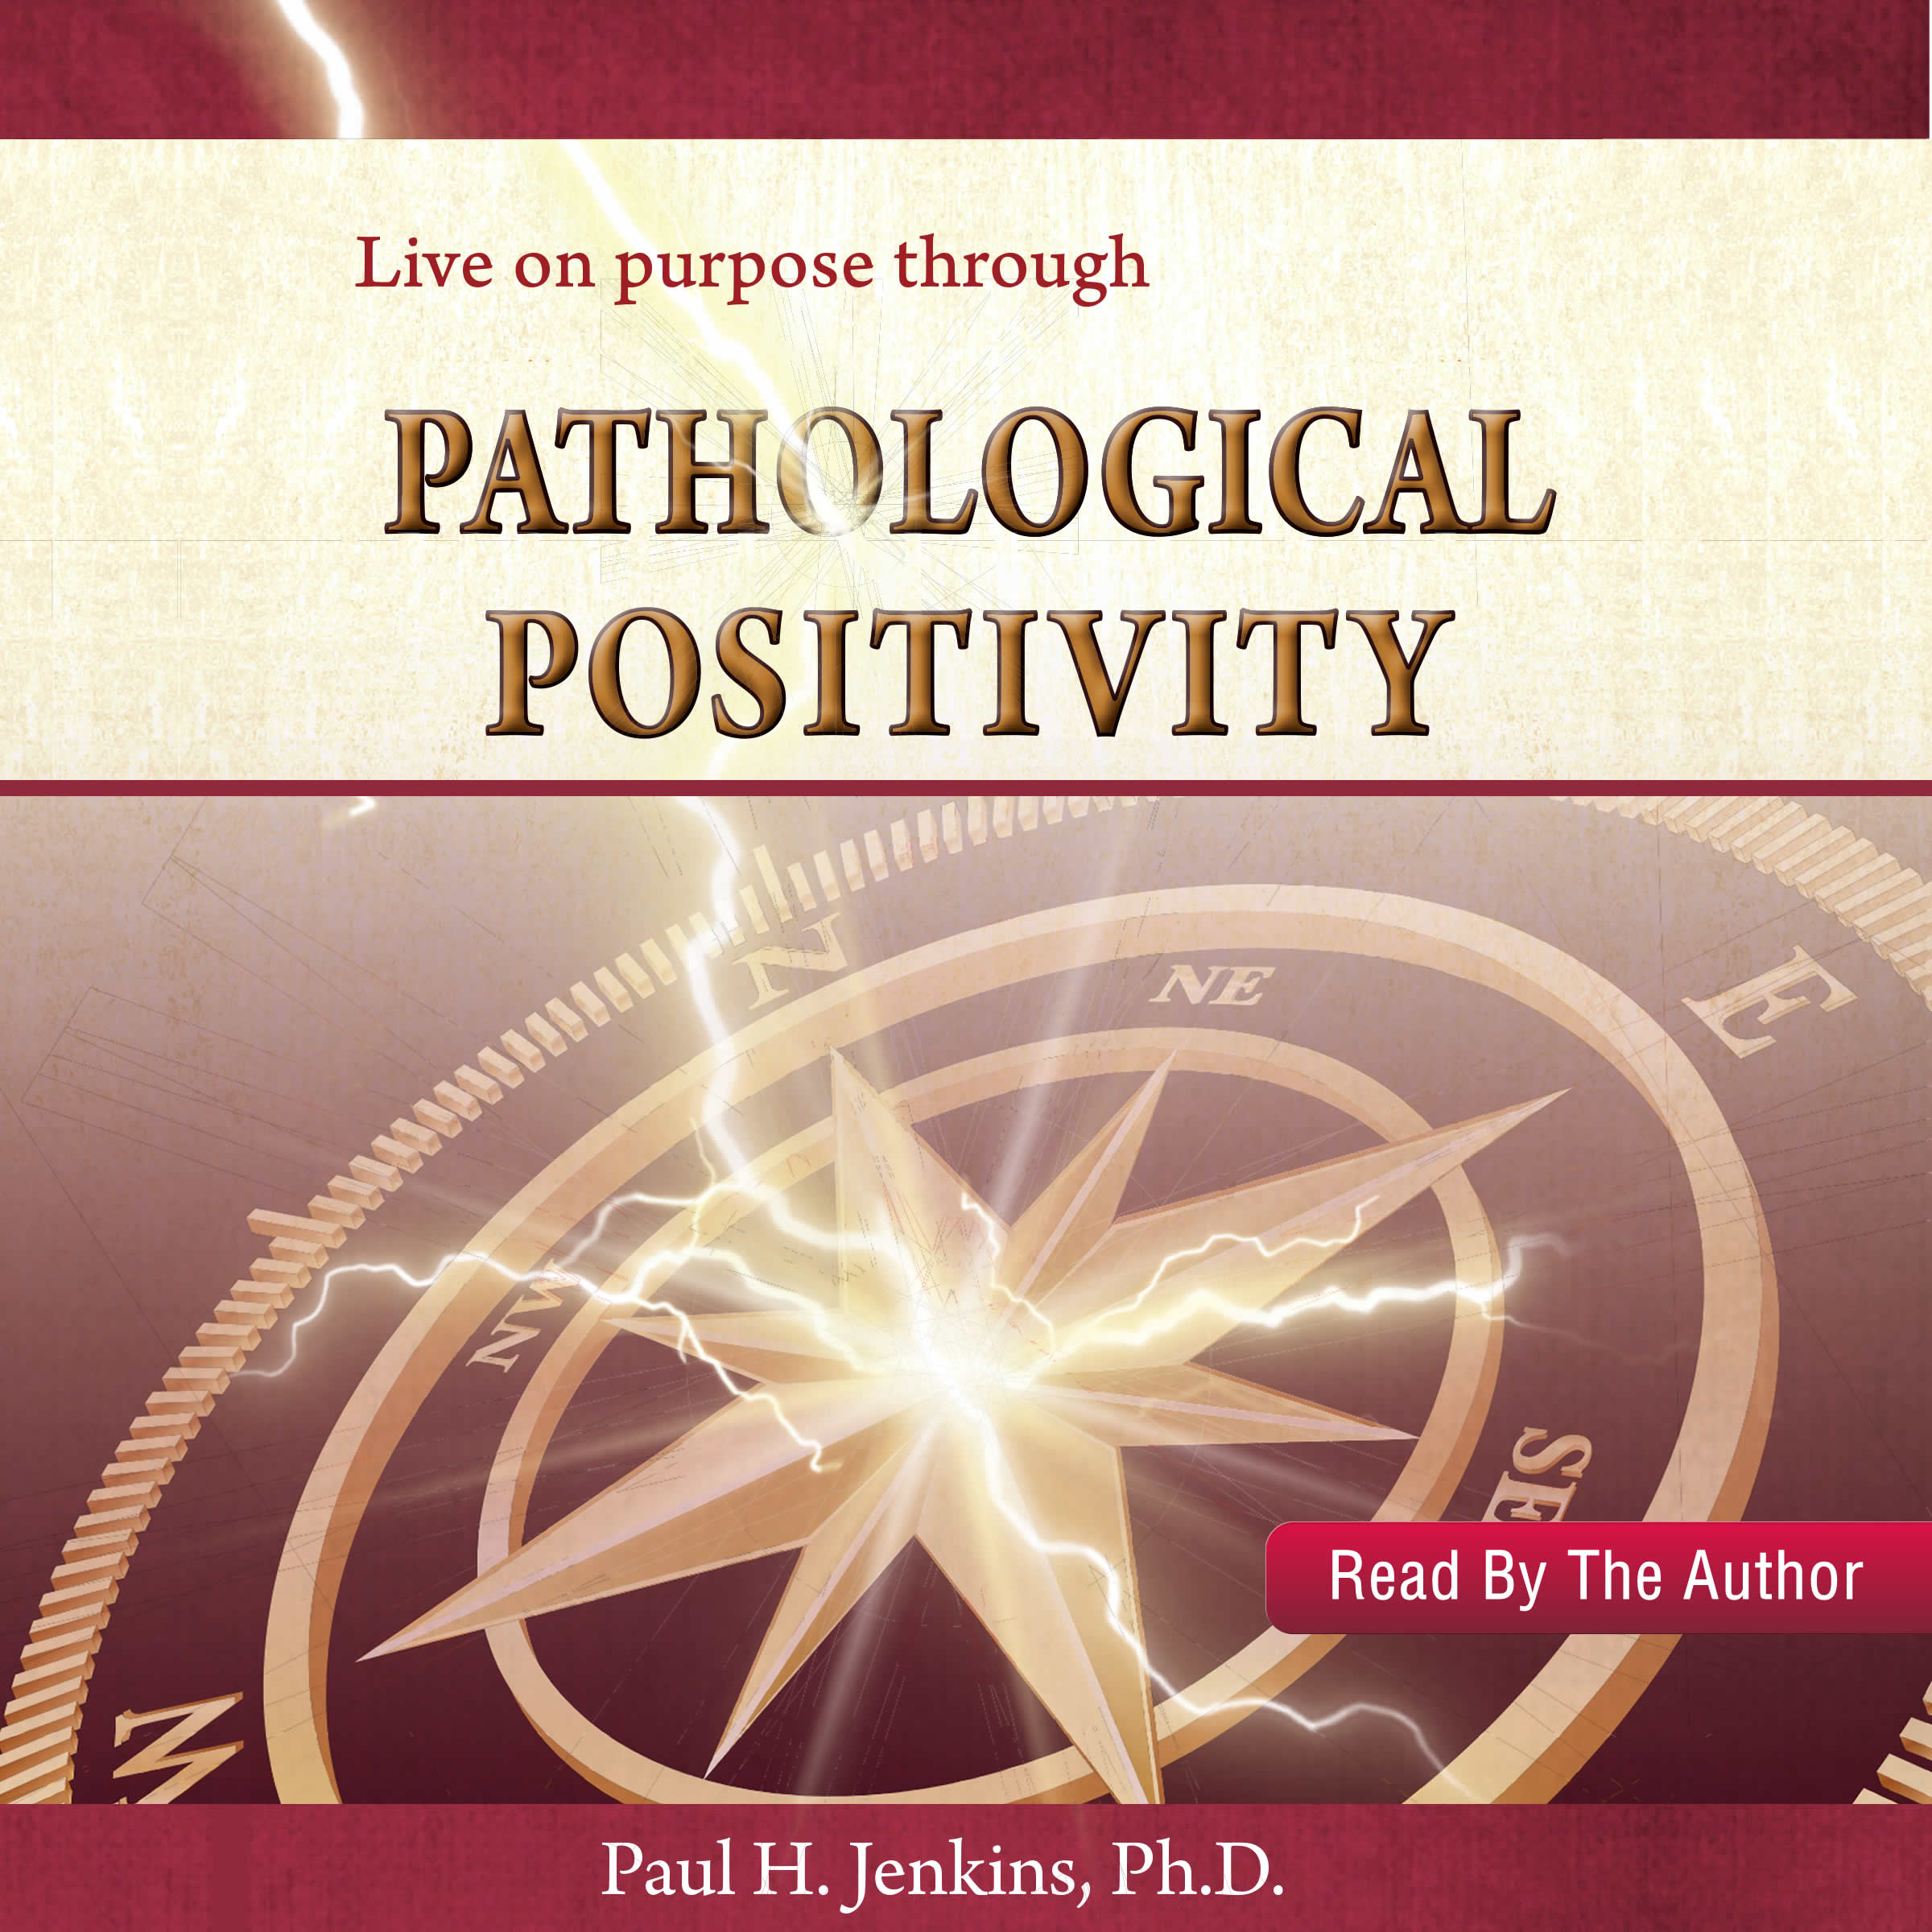 Pathological Positivity and Power Tools